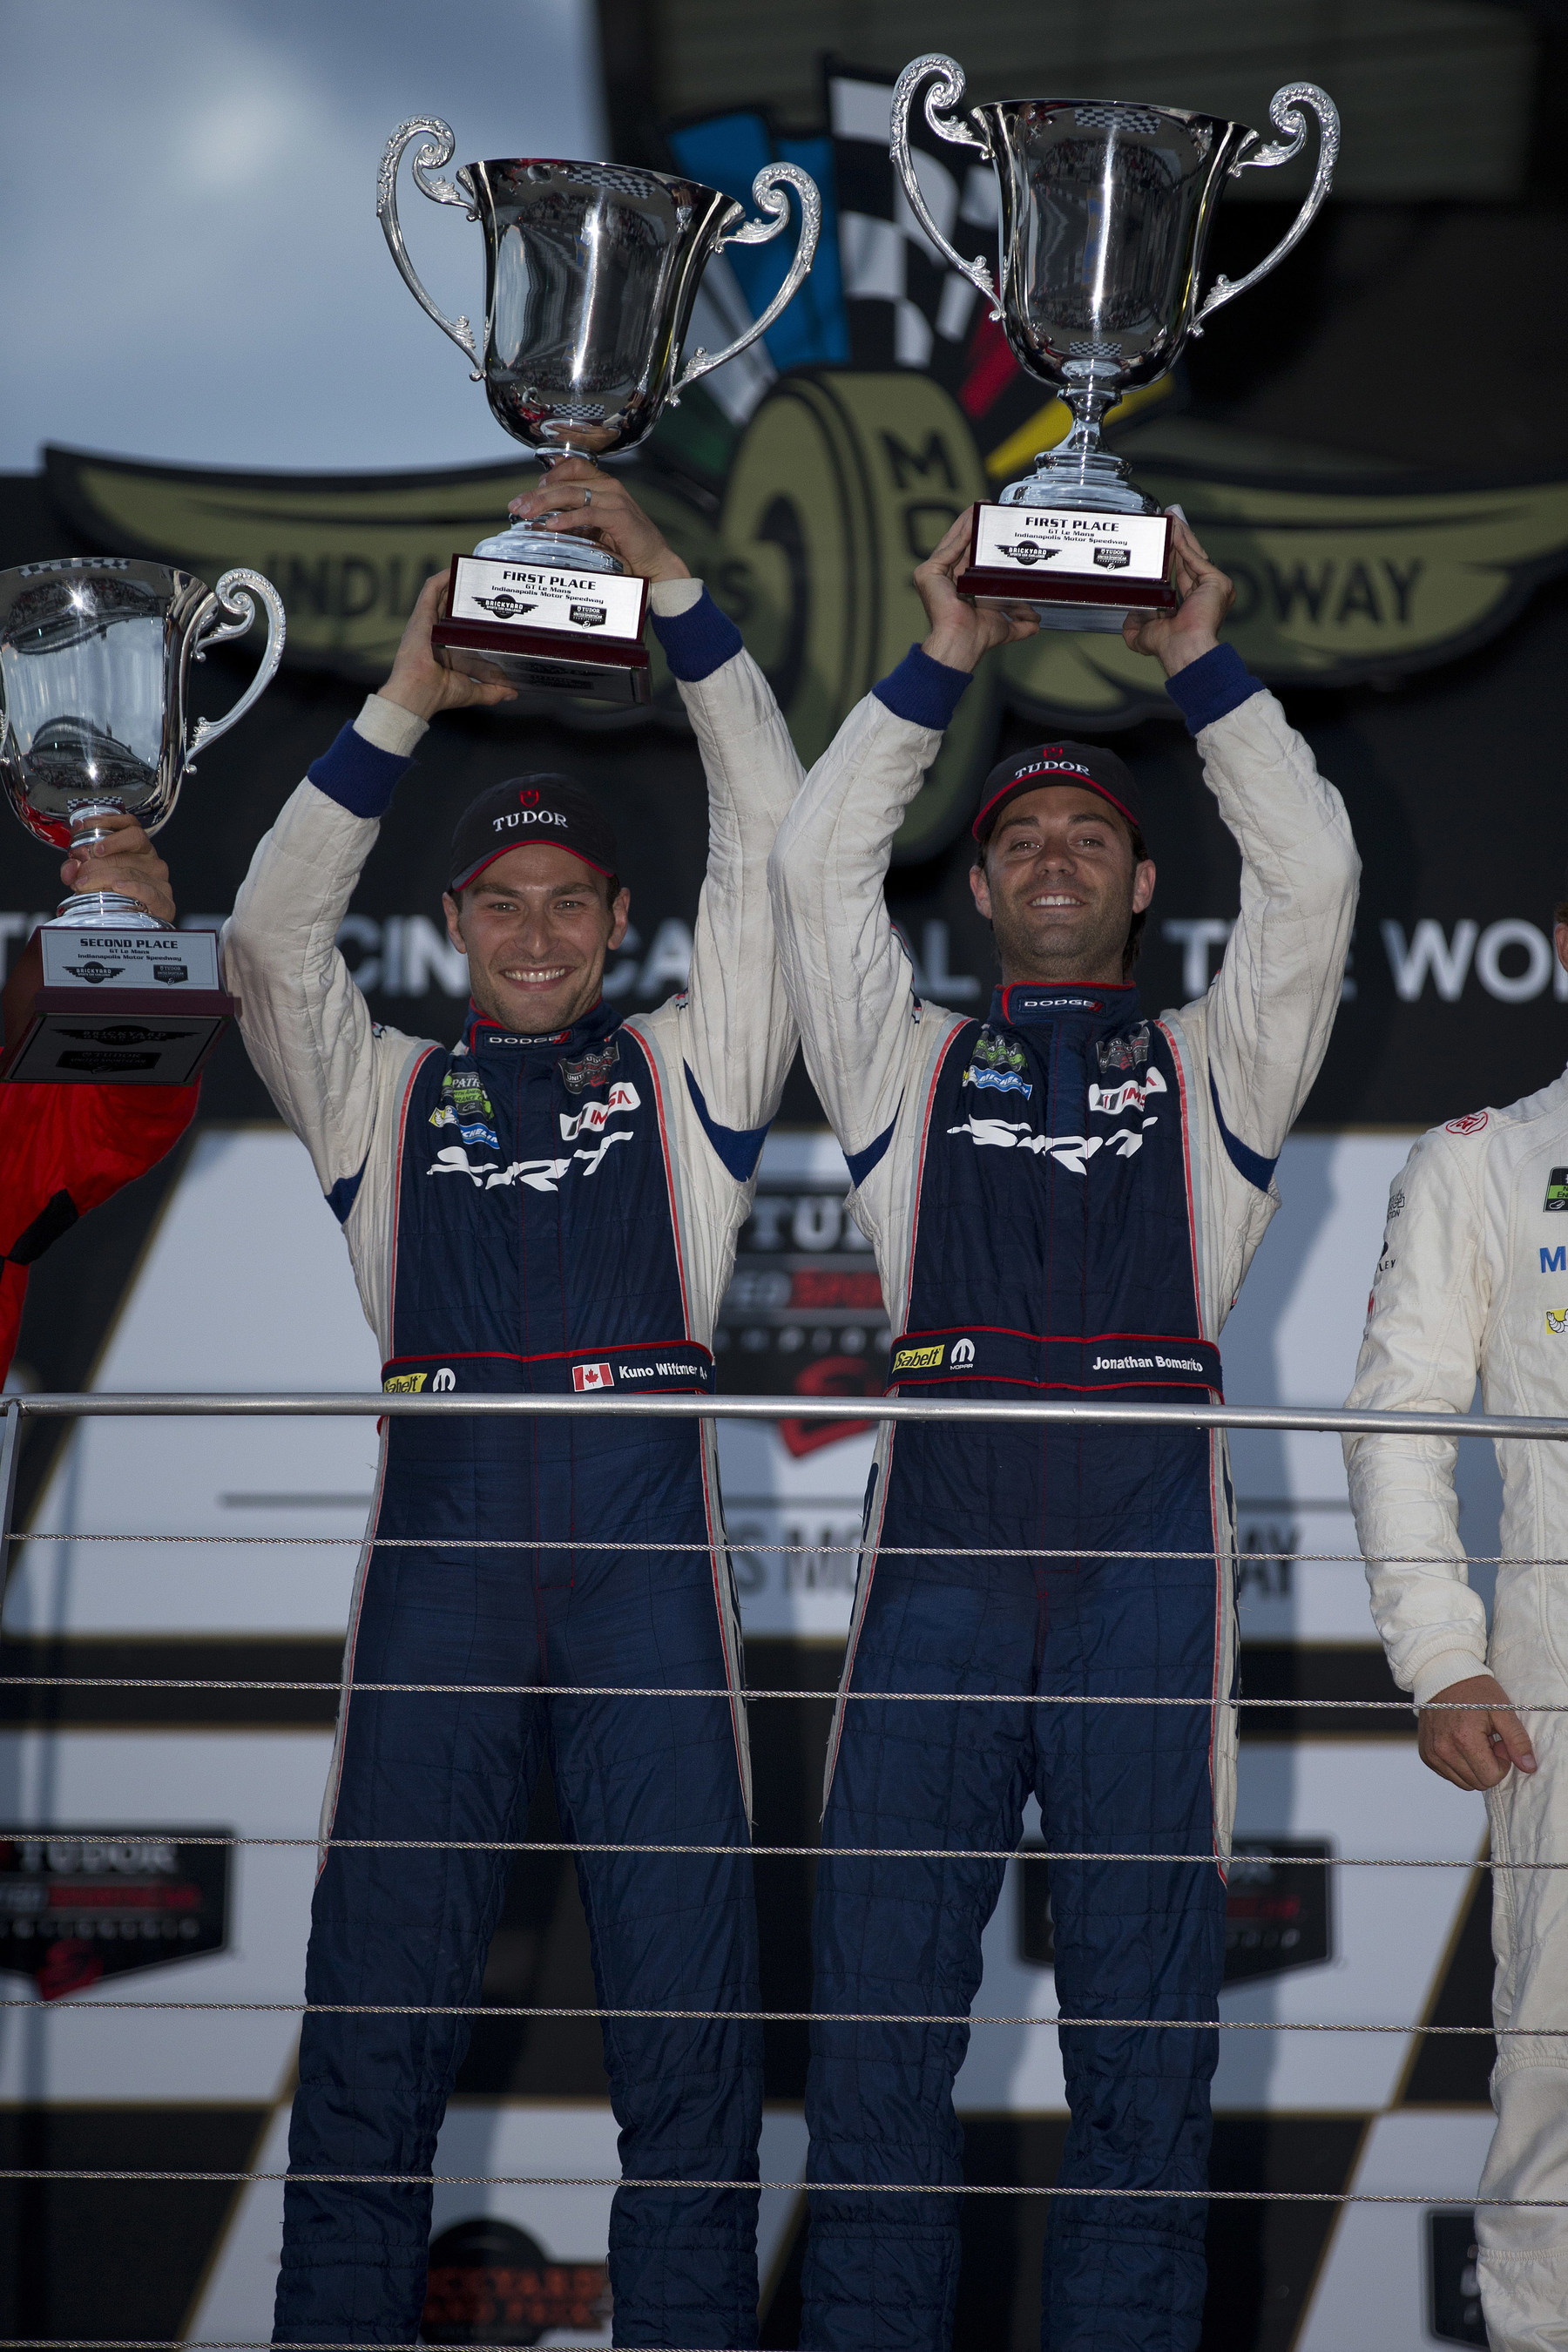 Drivers Kuno Wittmer, left, and Jonathan Bomarito hoist the winner trophies and celebrate after piloting the No. 93 Dodge Viper SRT GTS-R race car to a first-place finish in the GTLM class in the IMSA TUDOR United SportsCar Championship Brickyard Grand Prix on Friday, July 25, 2014. (PRNewsFoto/Chrysler Group LLC) (PRNewsFoto/Chrysler Group LLC)